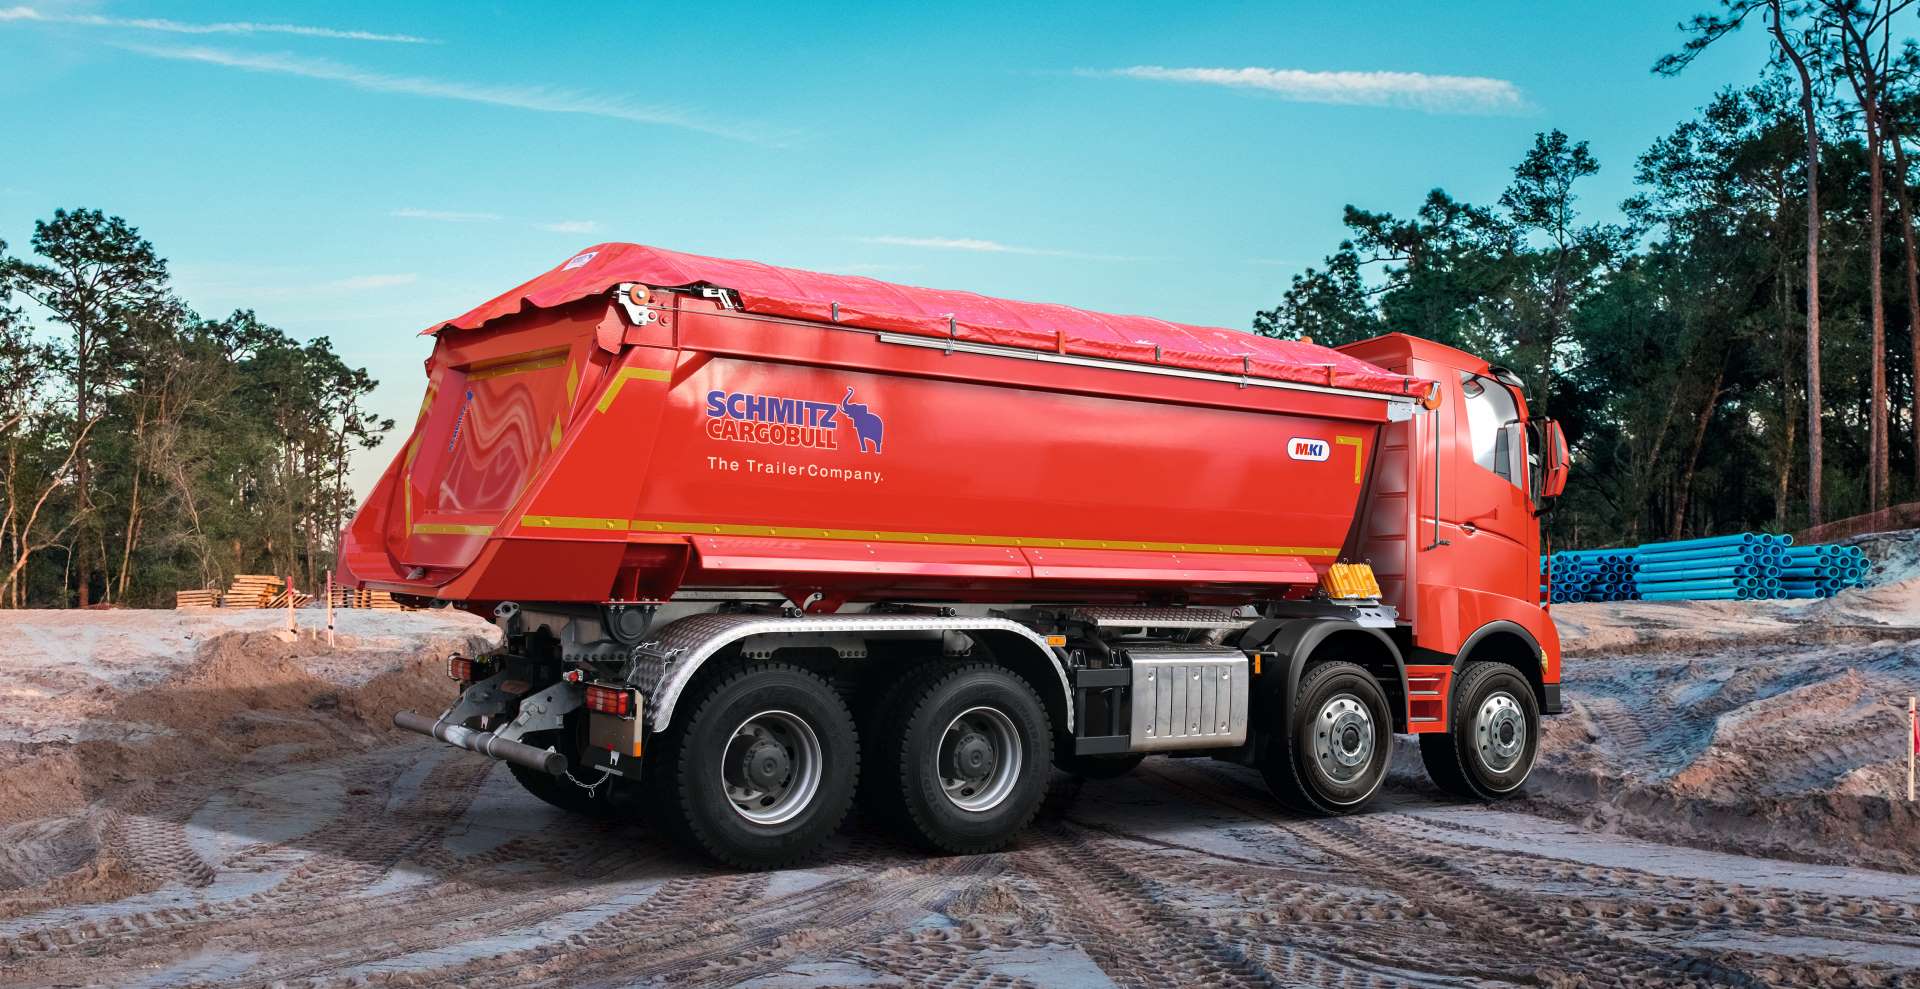 The matching M.KI truck tipper body with rounded steel body for all popular trucks